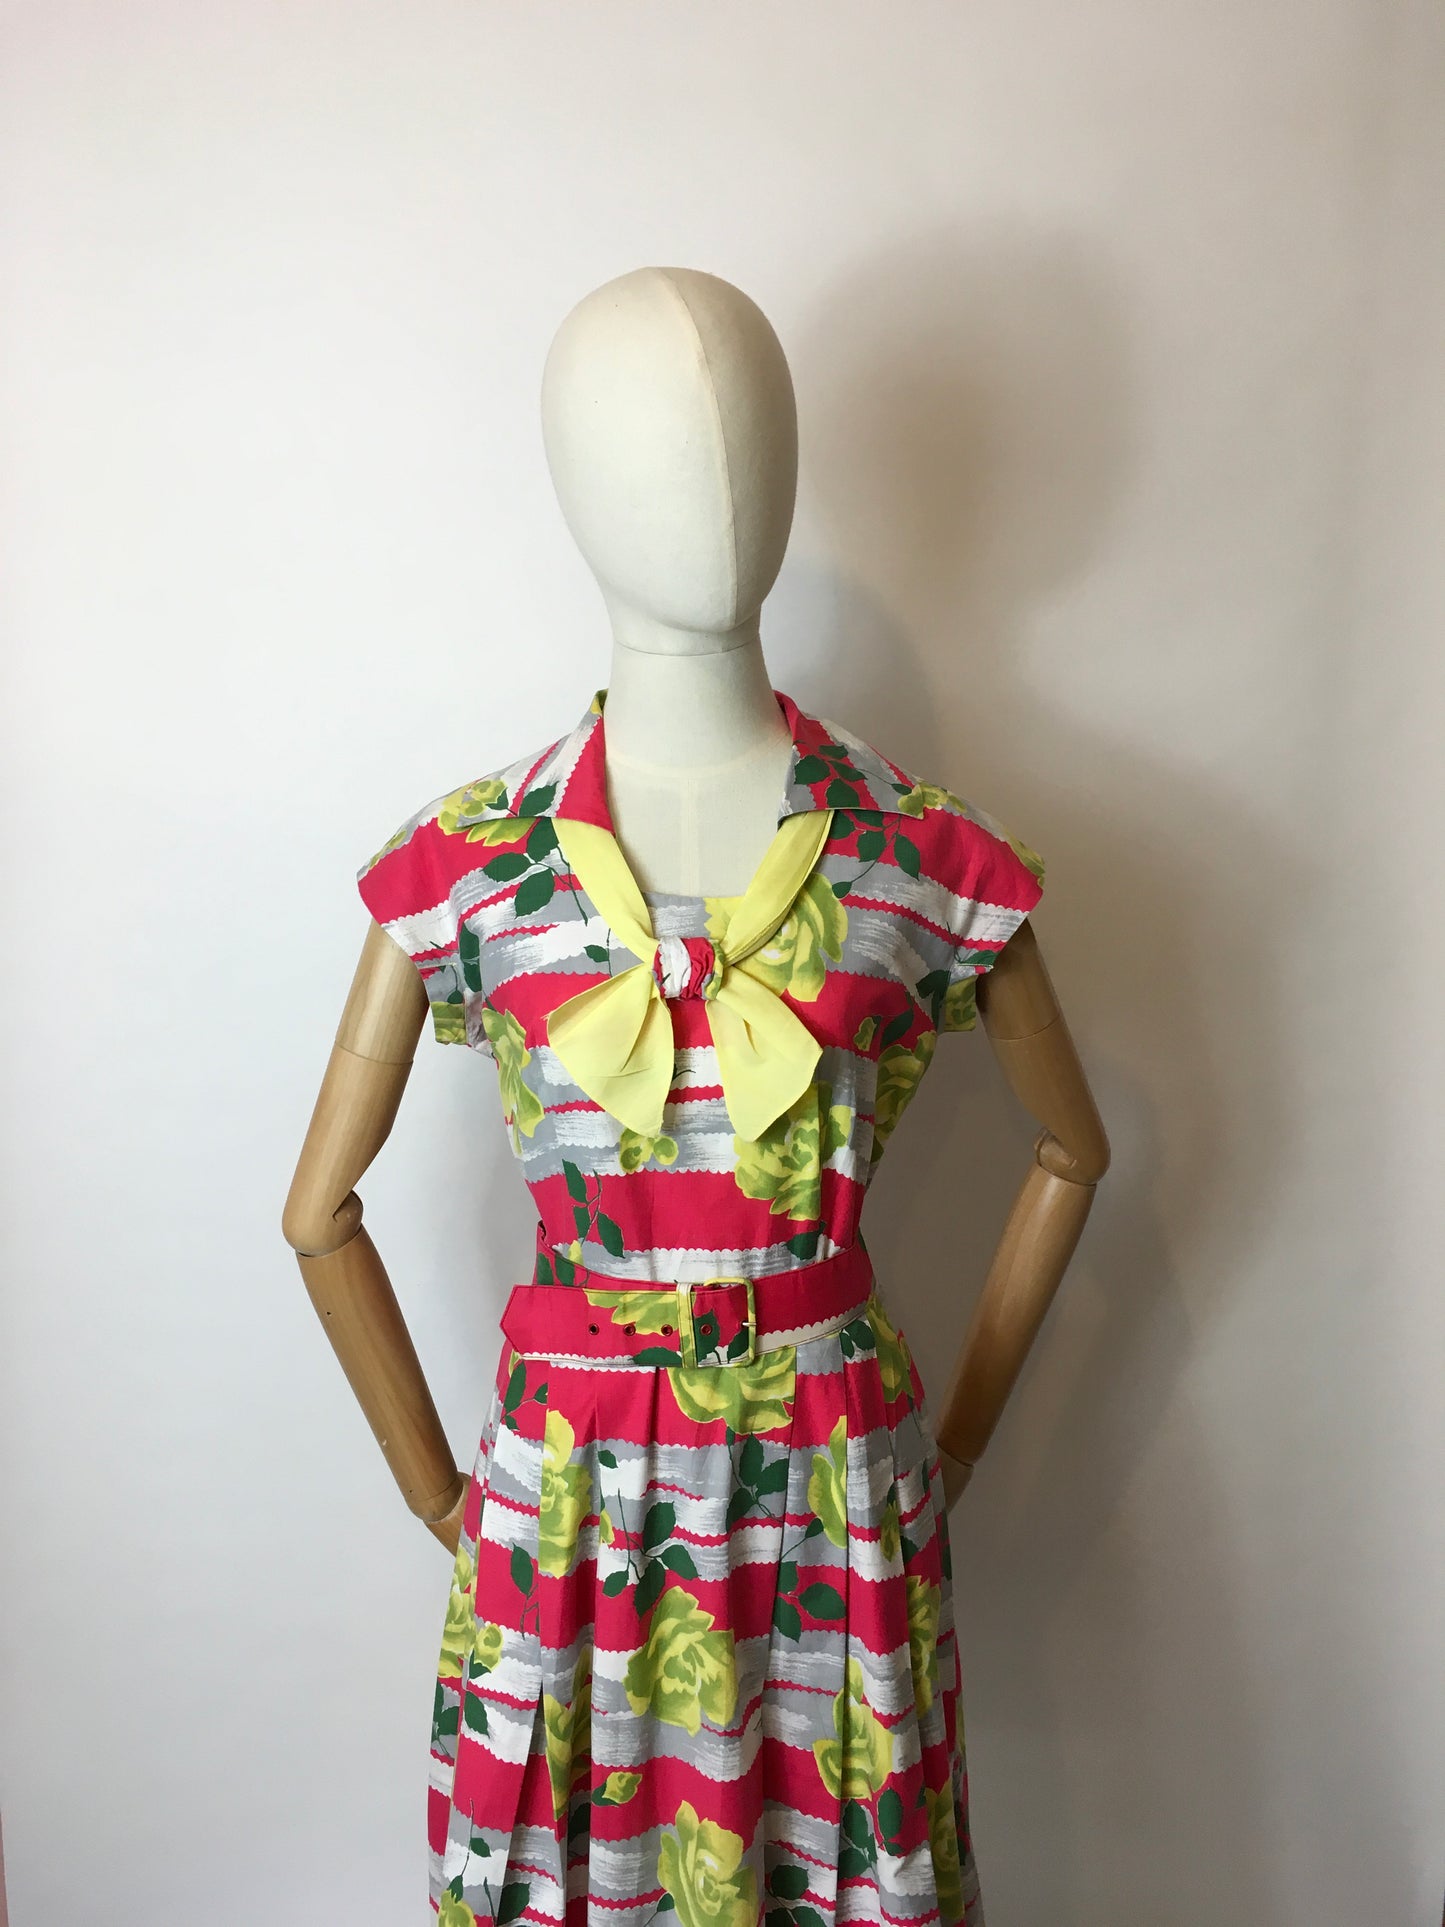 Original 1950s Cotton Day Dress - In a Fabulous Floral Cotton in Bright Pinks, Yellows & Greens